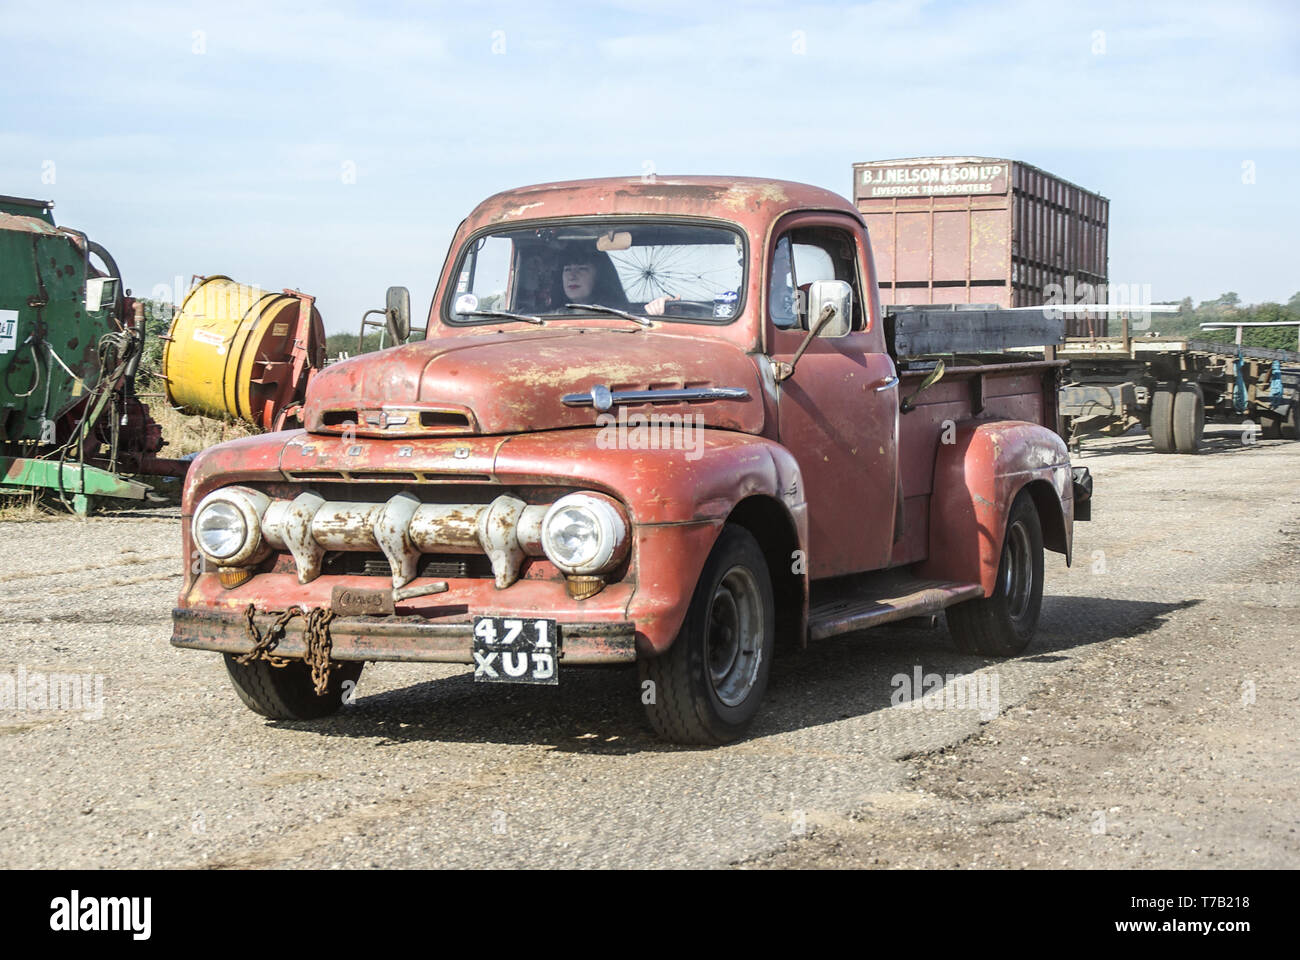 Rough rusty old vintage, classic Ford pickup truck driving through a farm with discarded ...